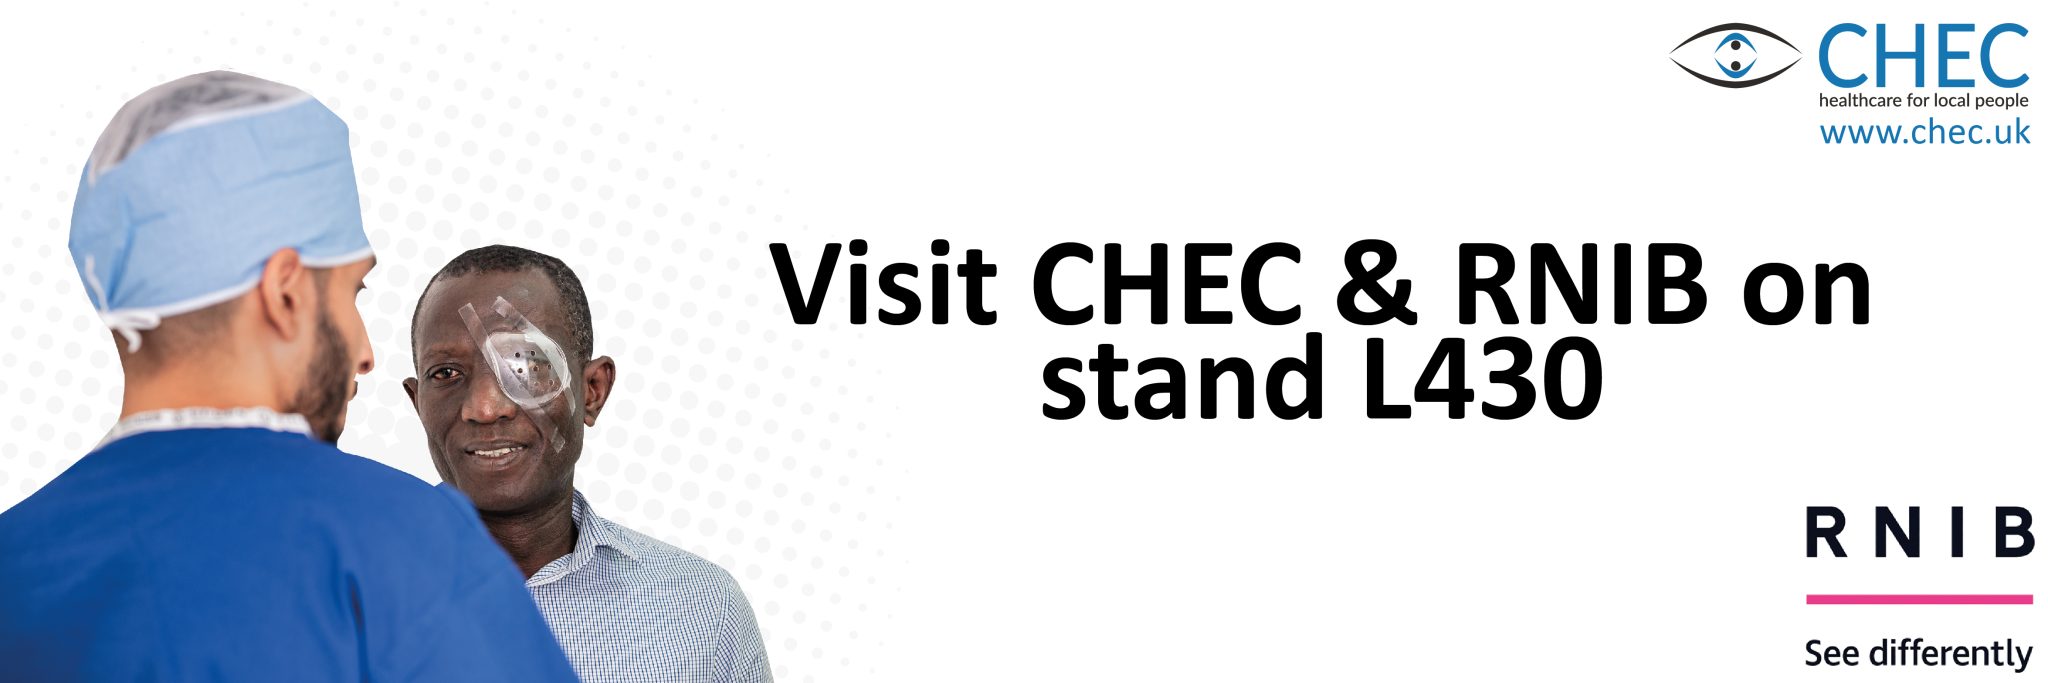 visit chec and rnib on stand L430